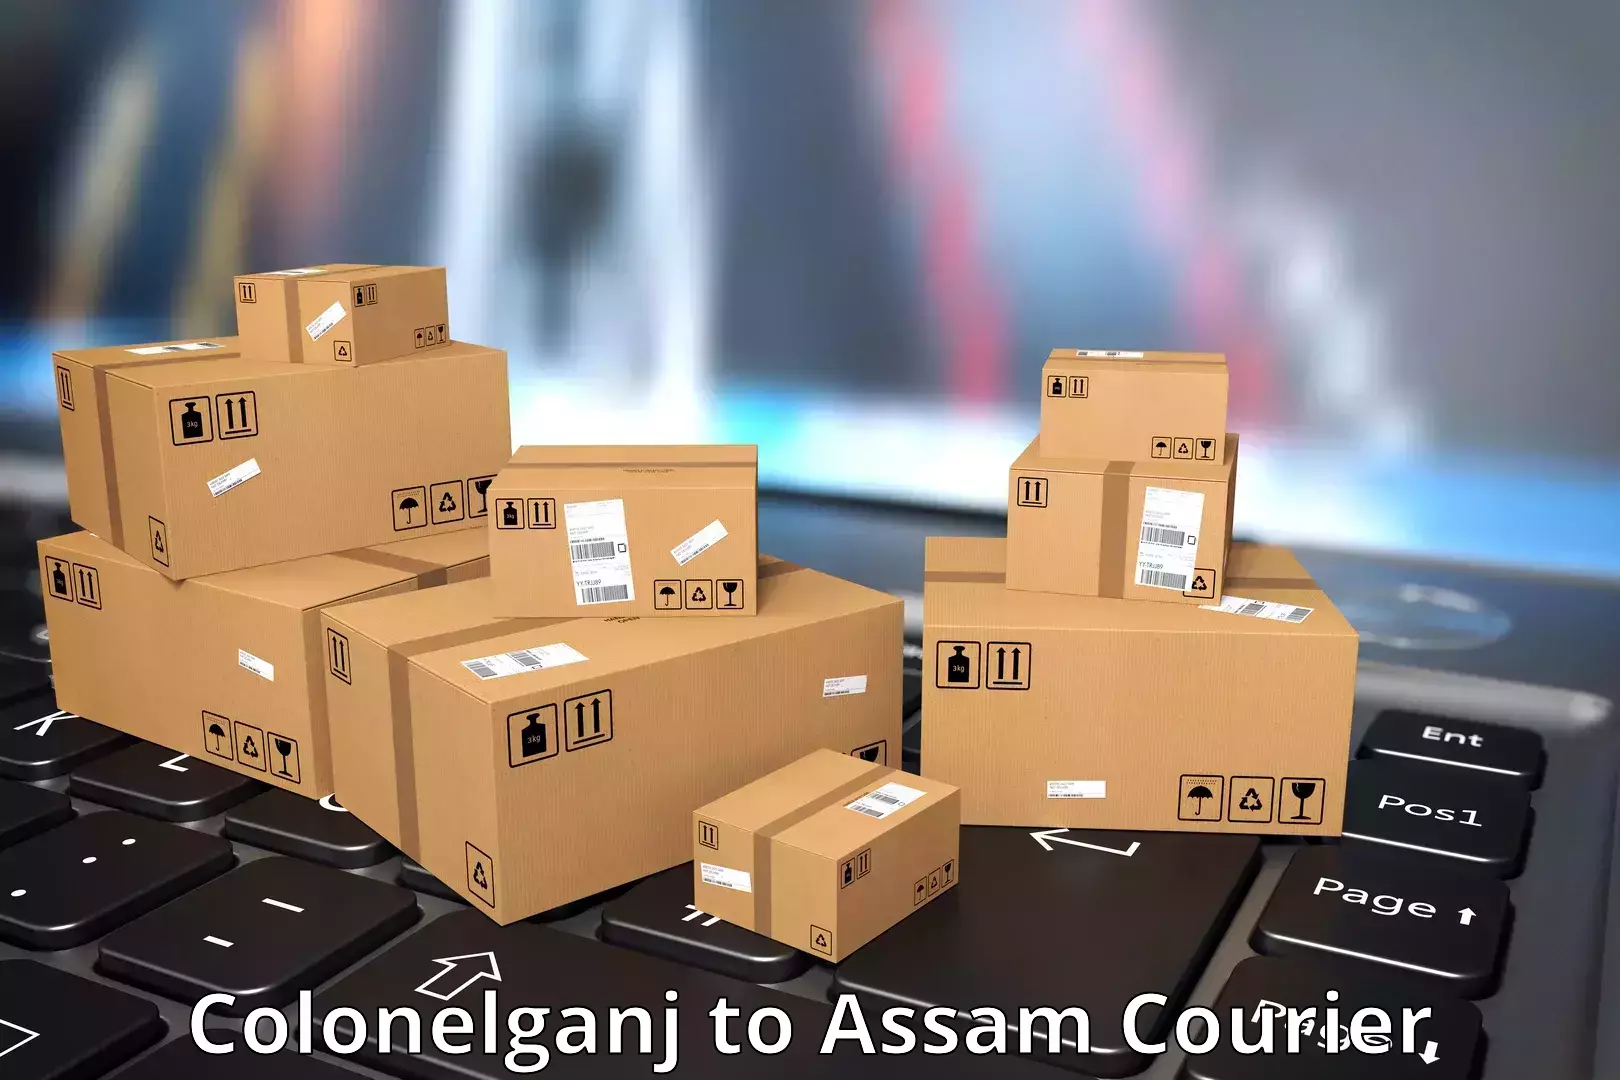 24/7 courier service in Colonelganj to Lala Assam